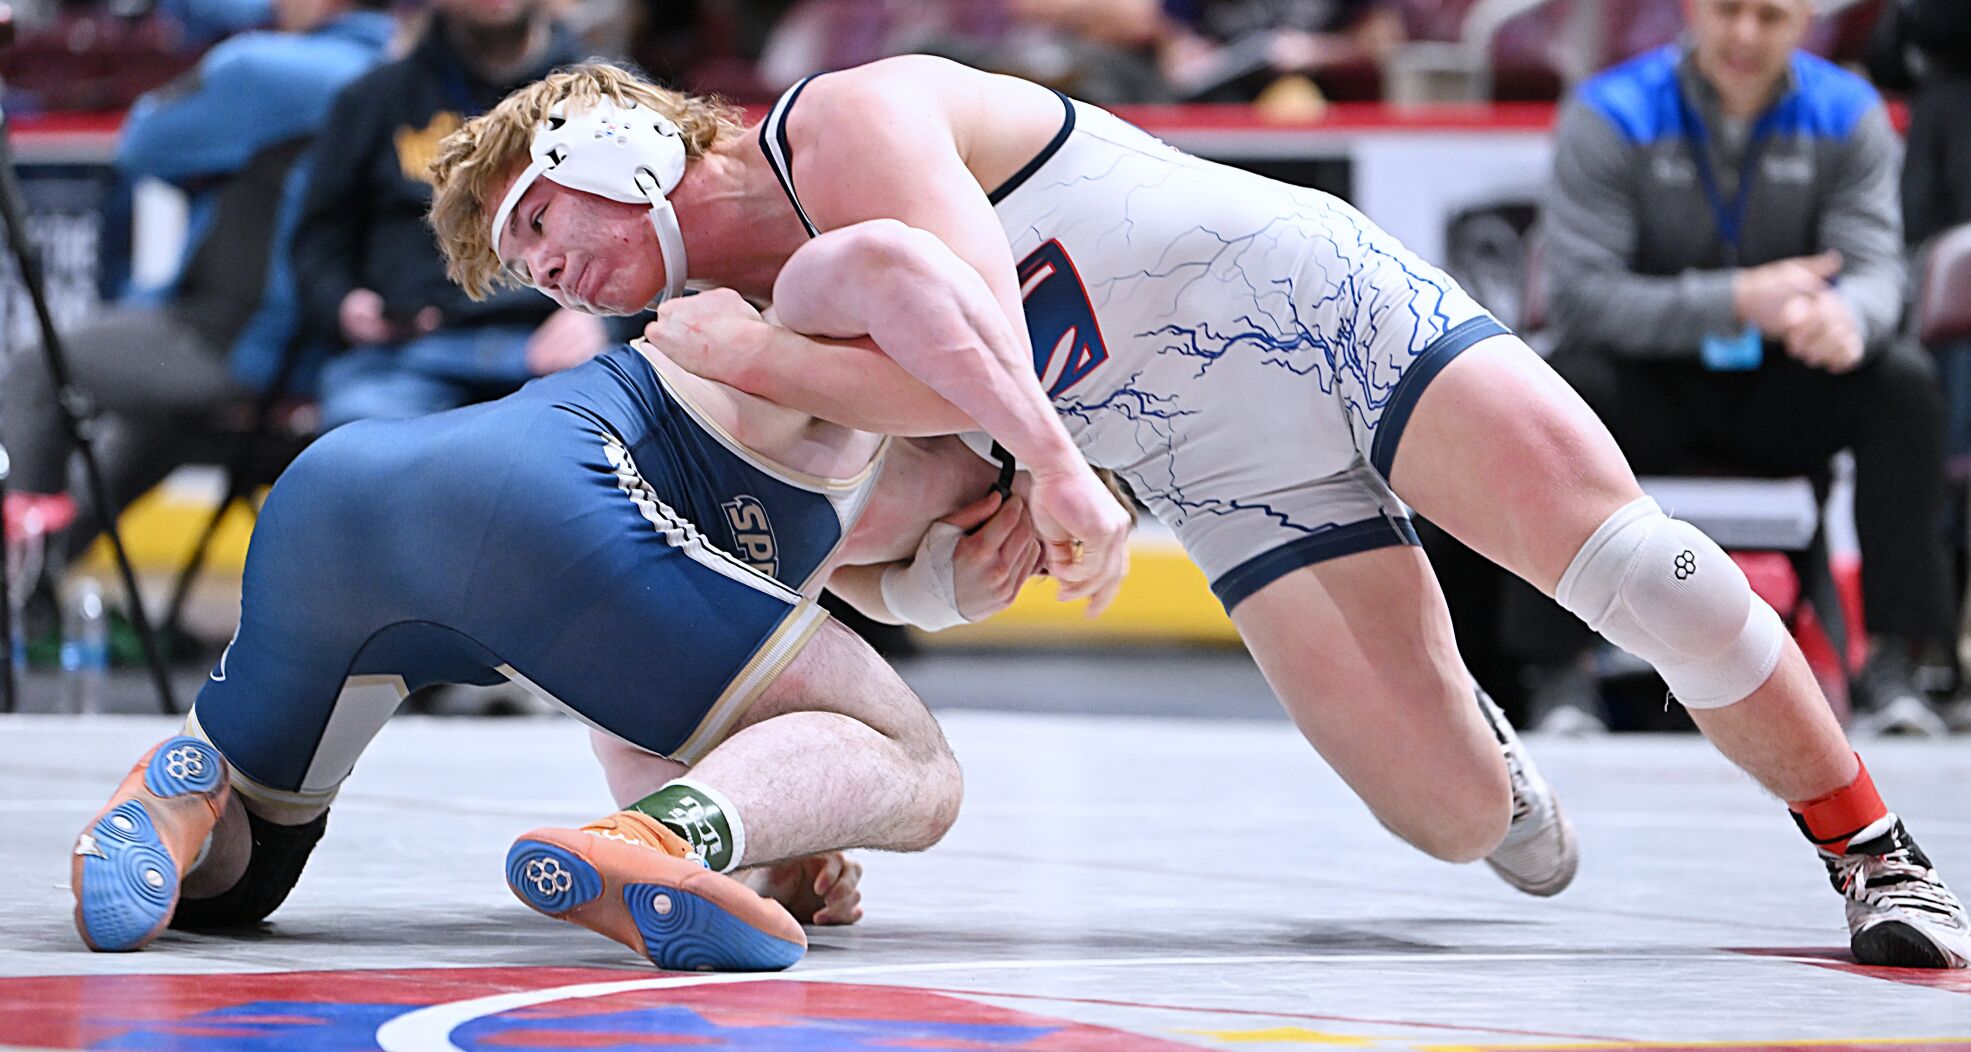 Wetzel and Teats Secure Medal Podium Spots in Class 3A Wrestling Tournament